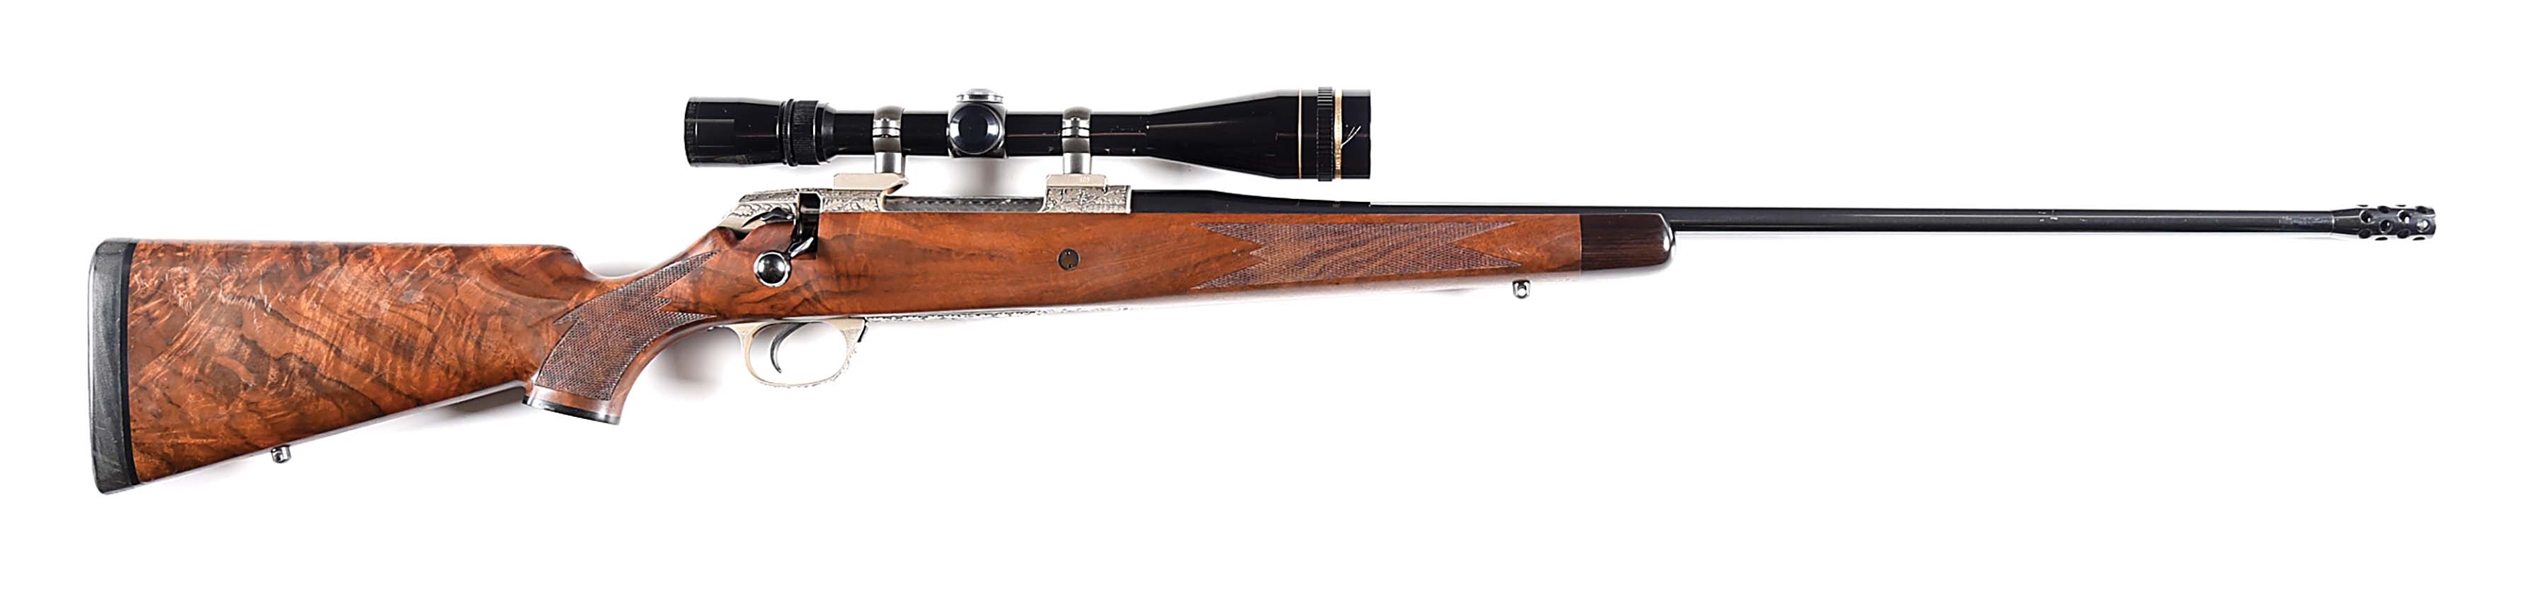 (M) KLEINGUENTHER IMPORTED VOERE K15 BOLT ACTION RIFLE .338 WIN MAG.